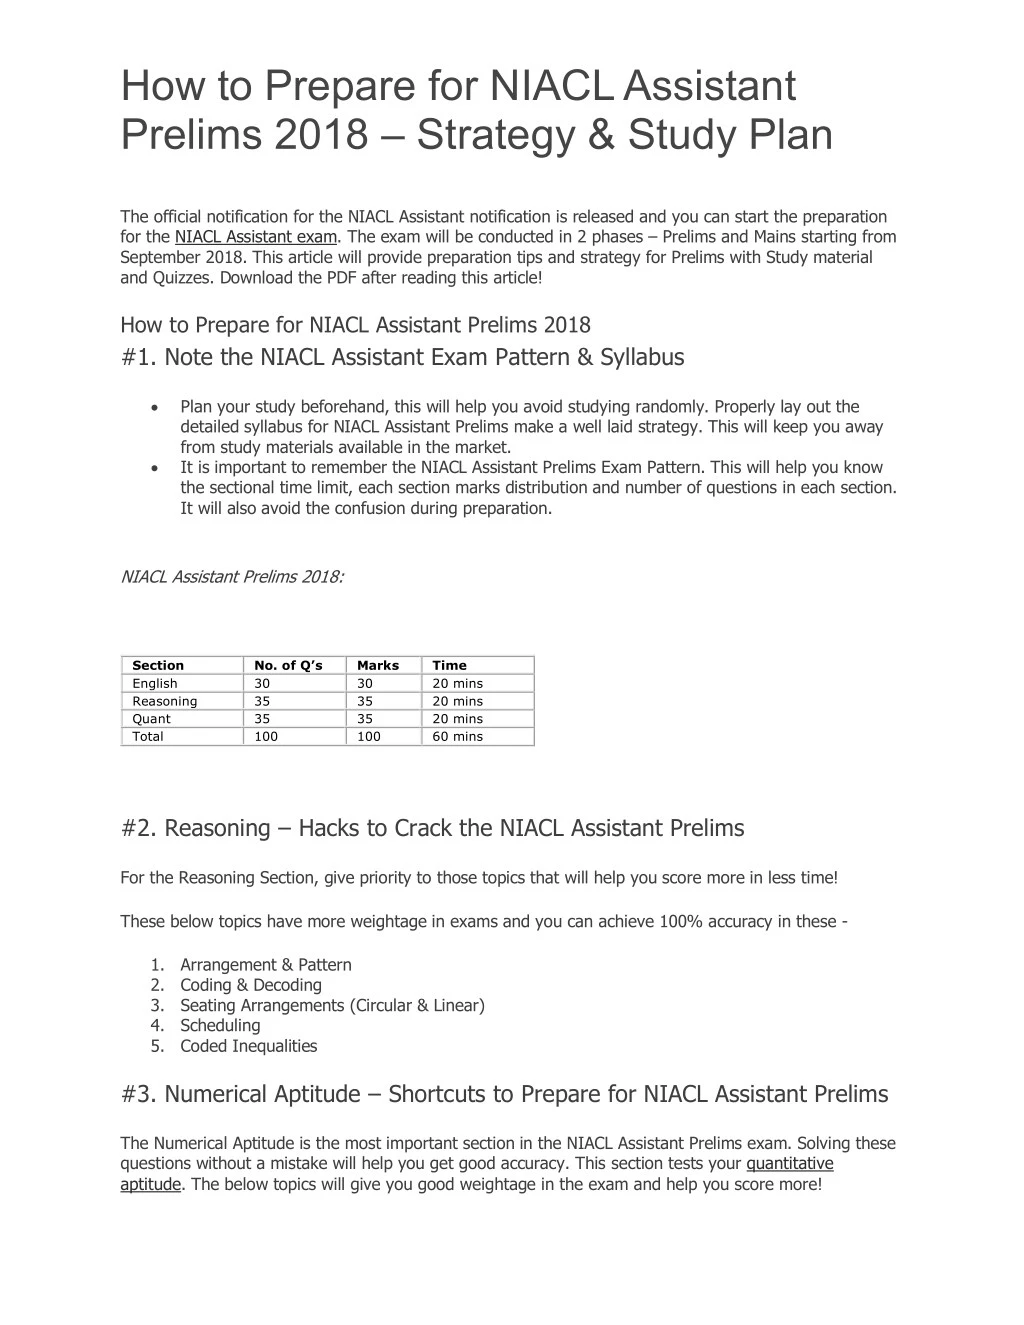 how to prepare for niacl assistant prelims 2018